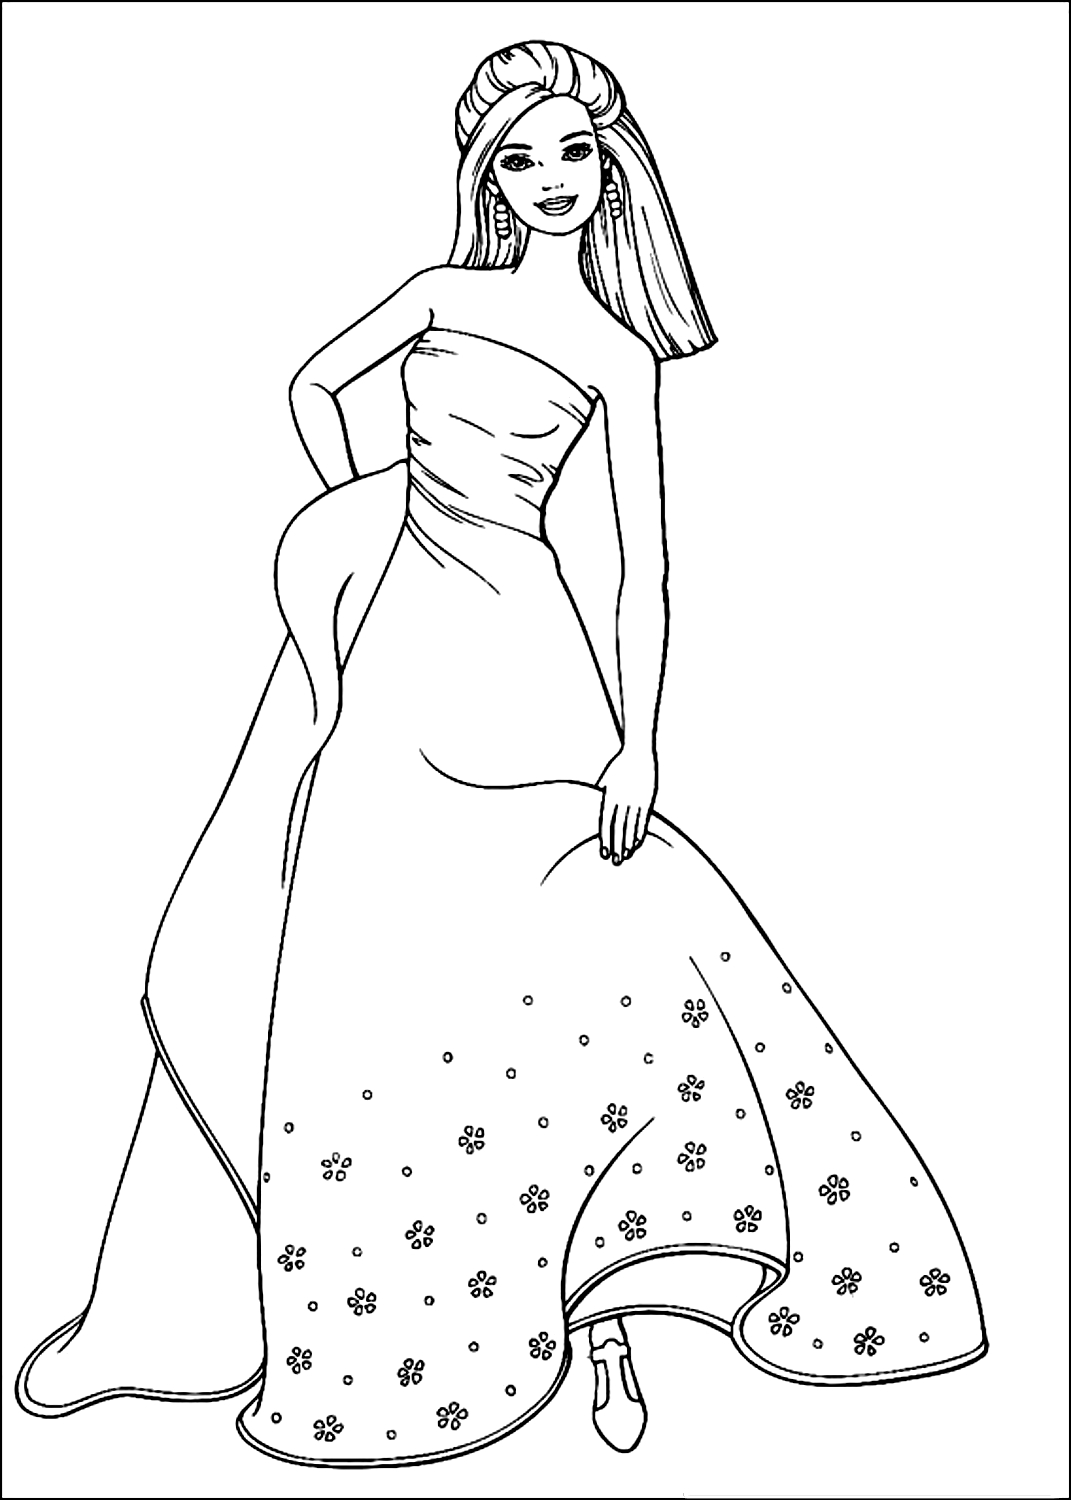 Barbie 48  coloring page to print and coloring